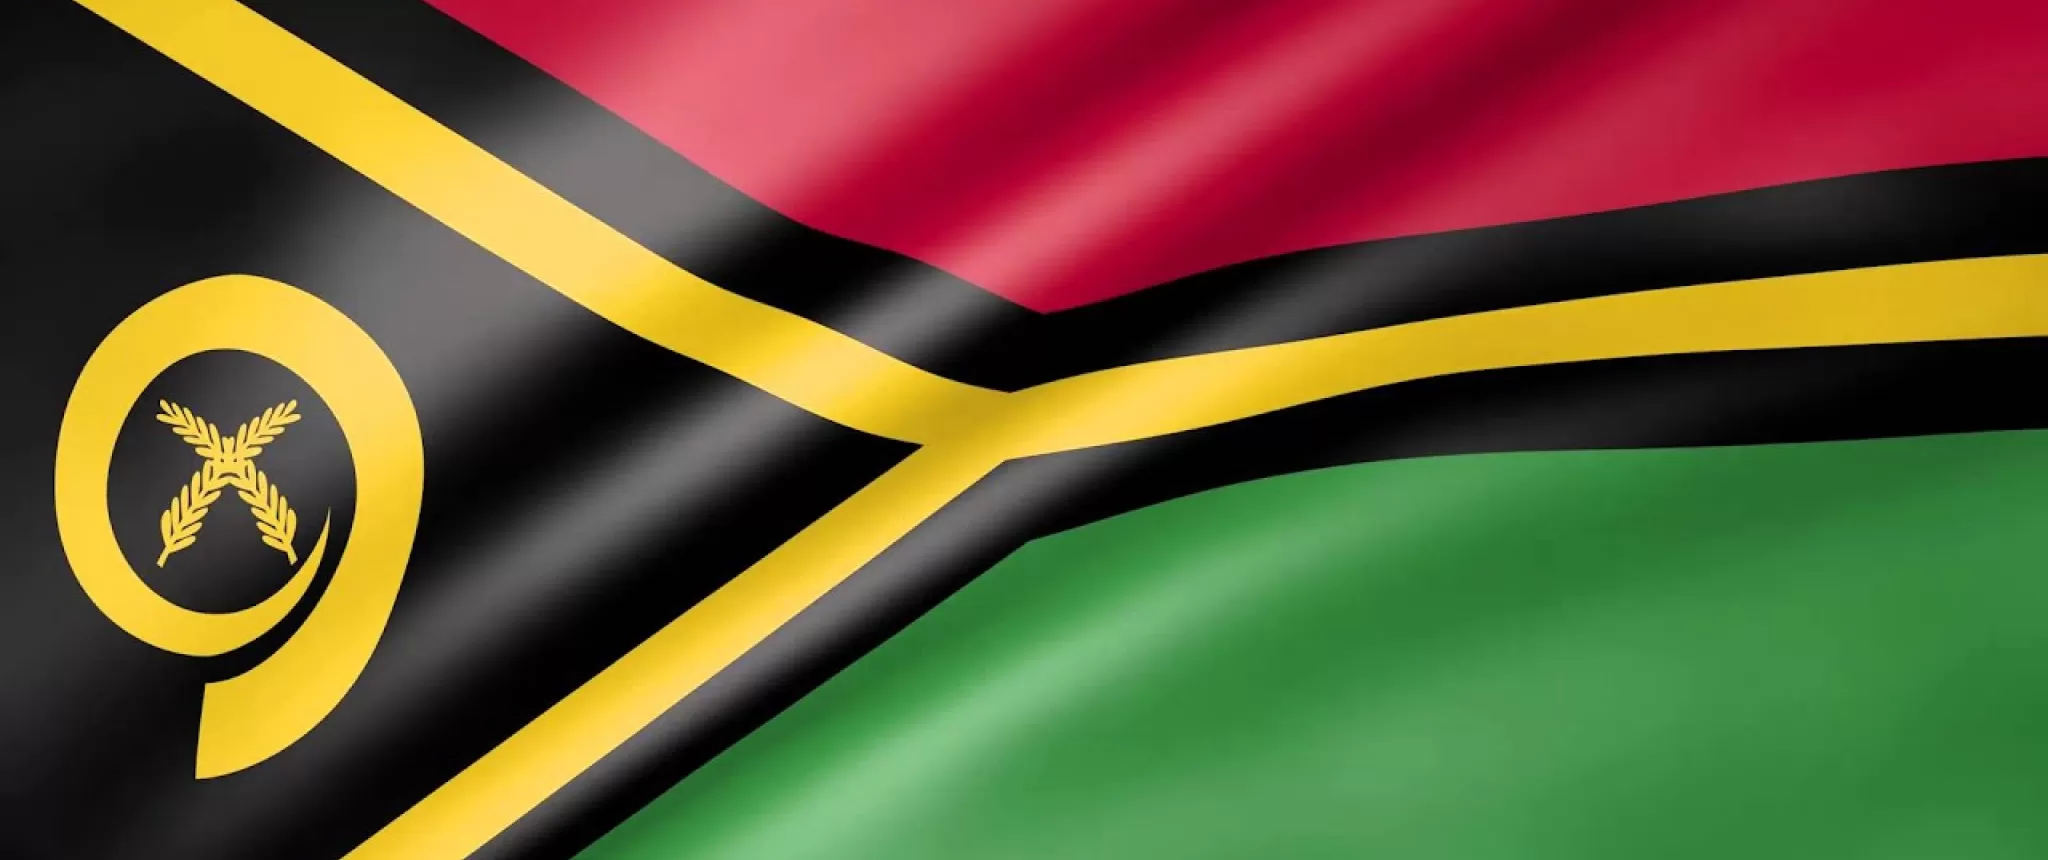 Vanuatu declined cryptocurrency ban after lobbying efforts made by jurists